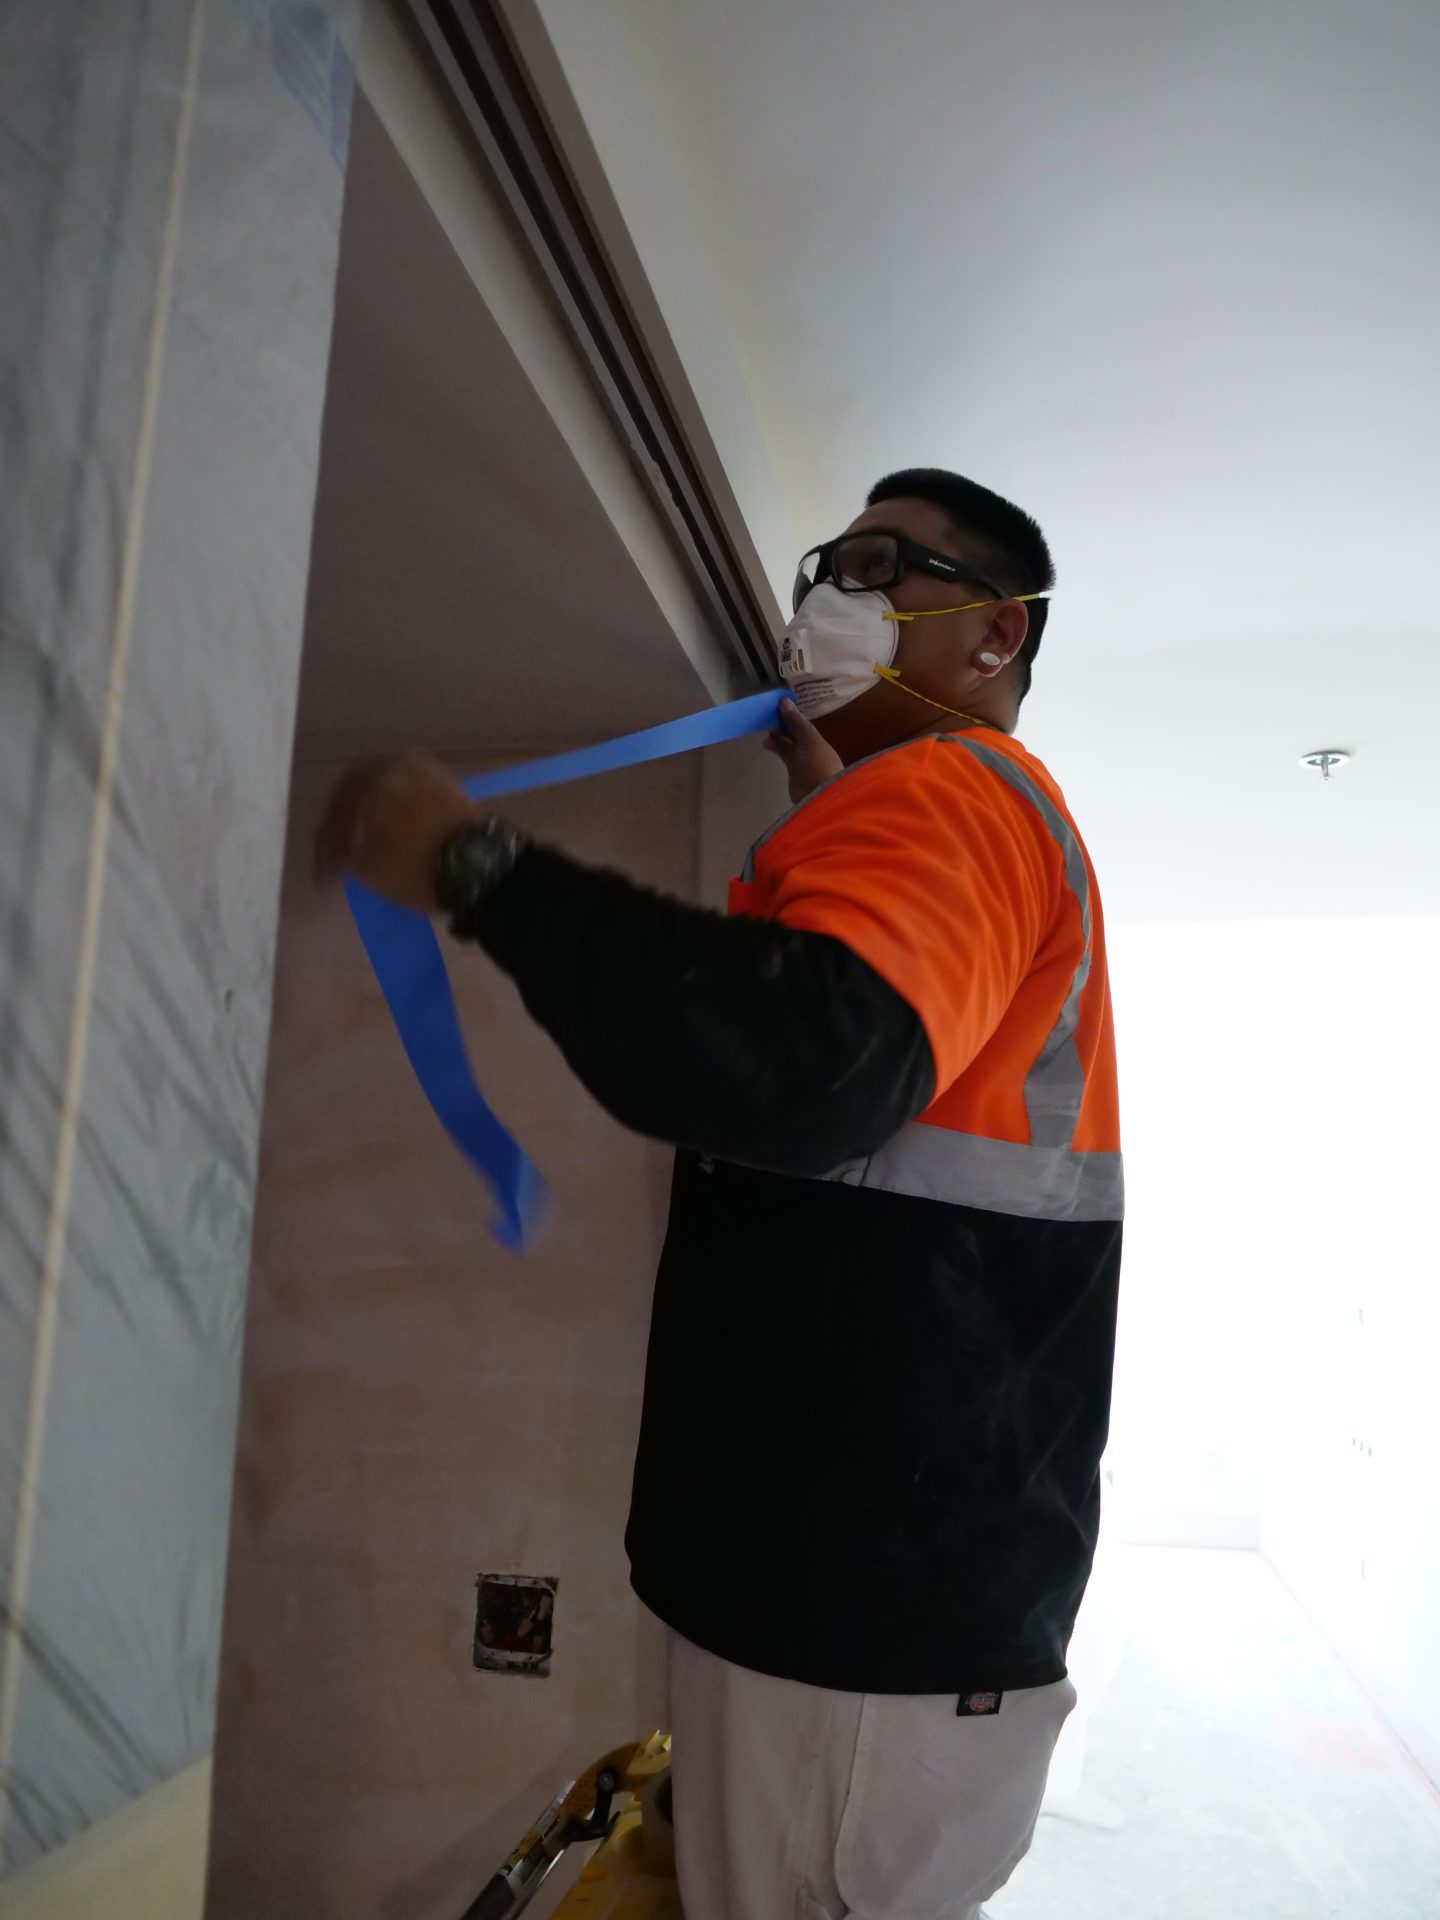 Image from the Gallery: Drywall Finishers 2018